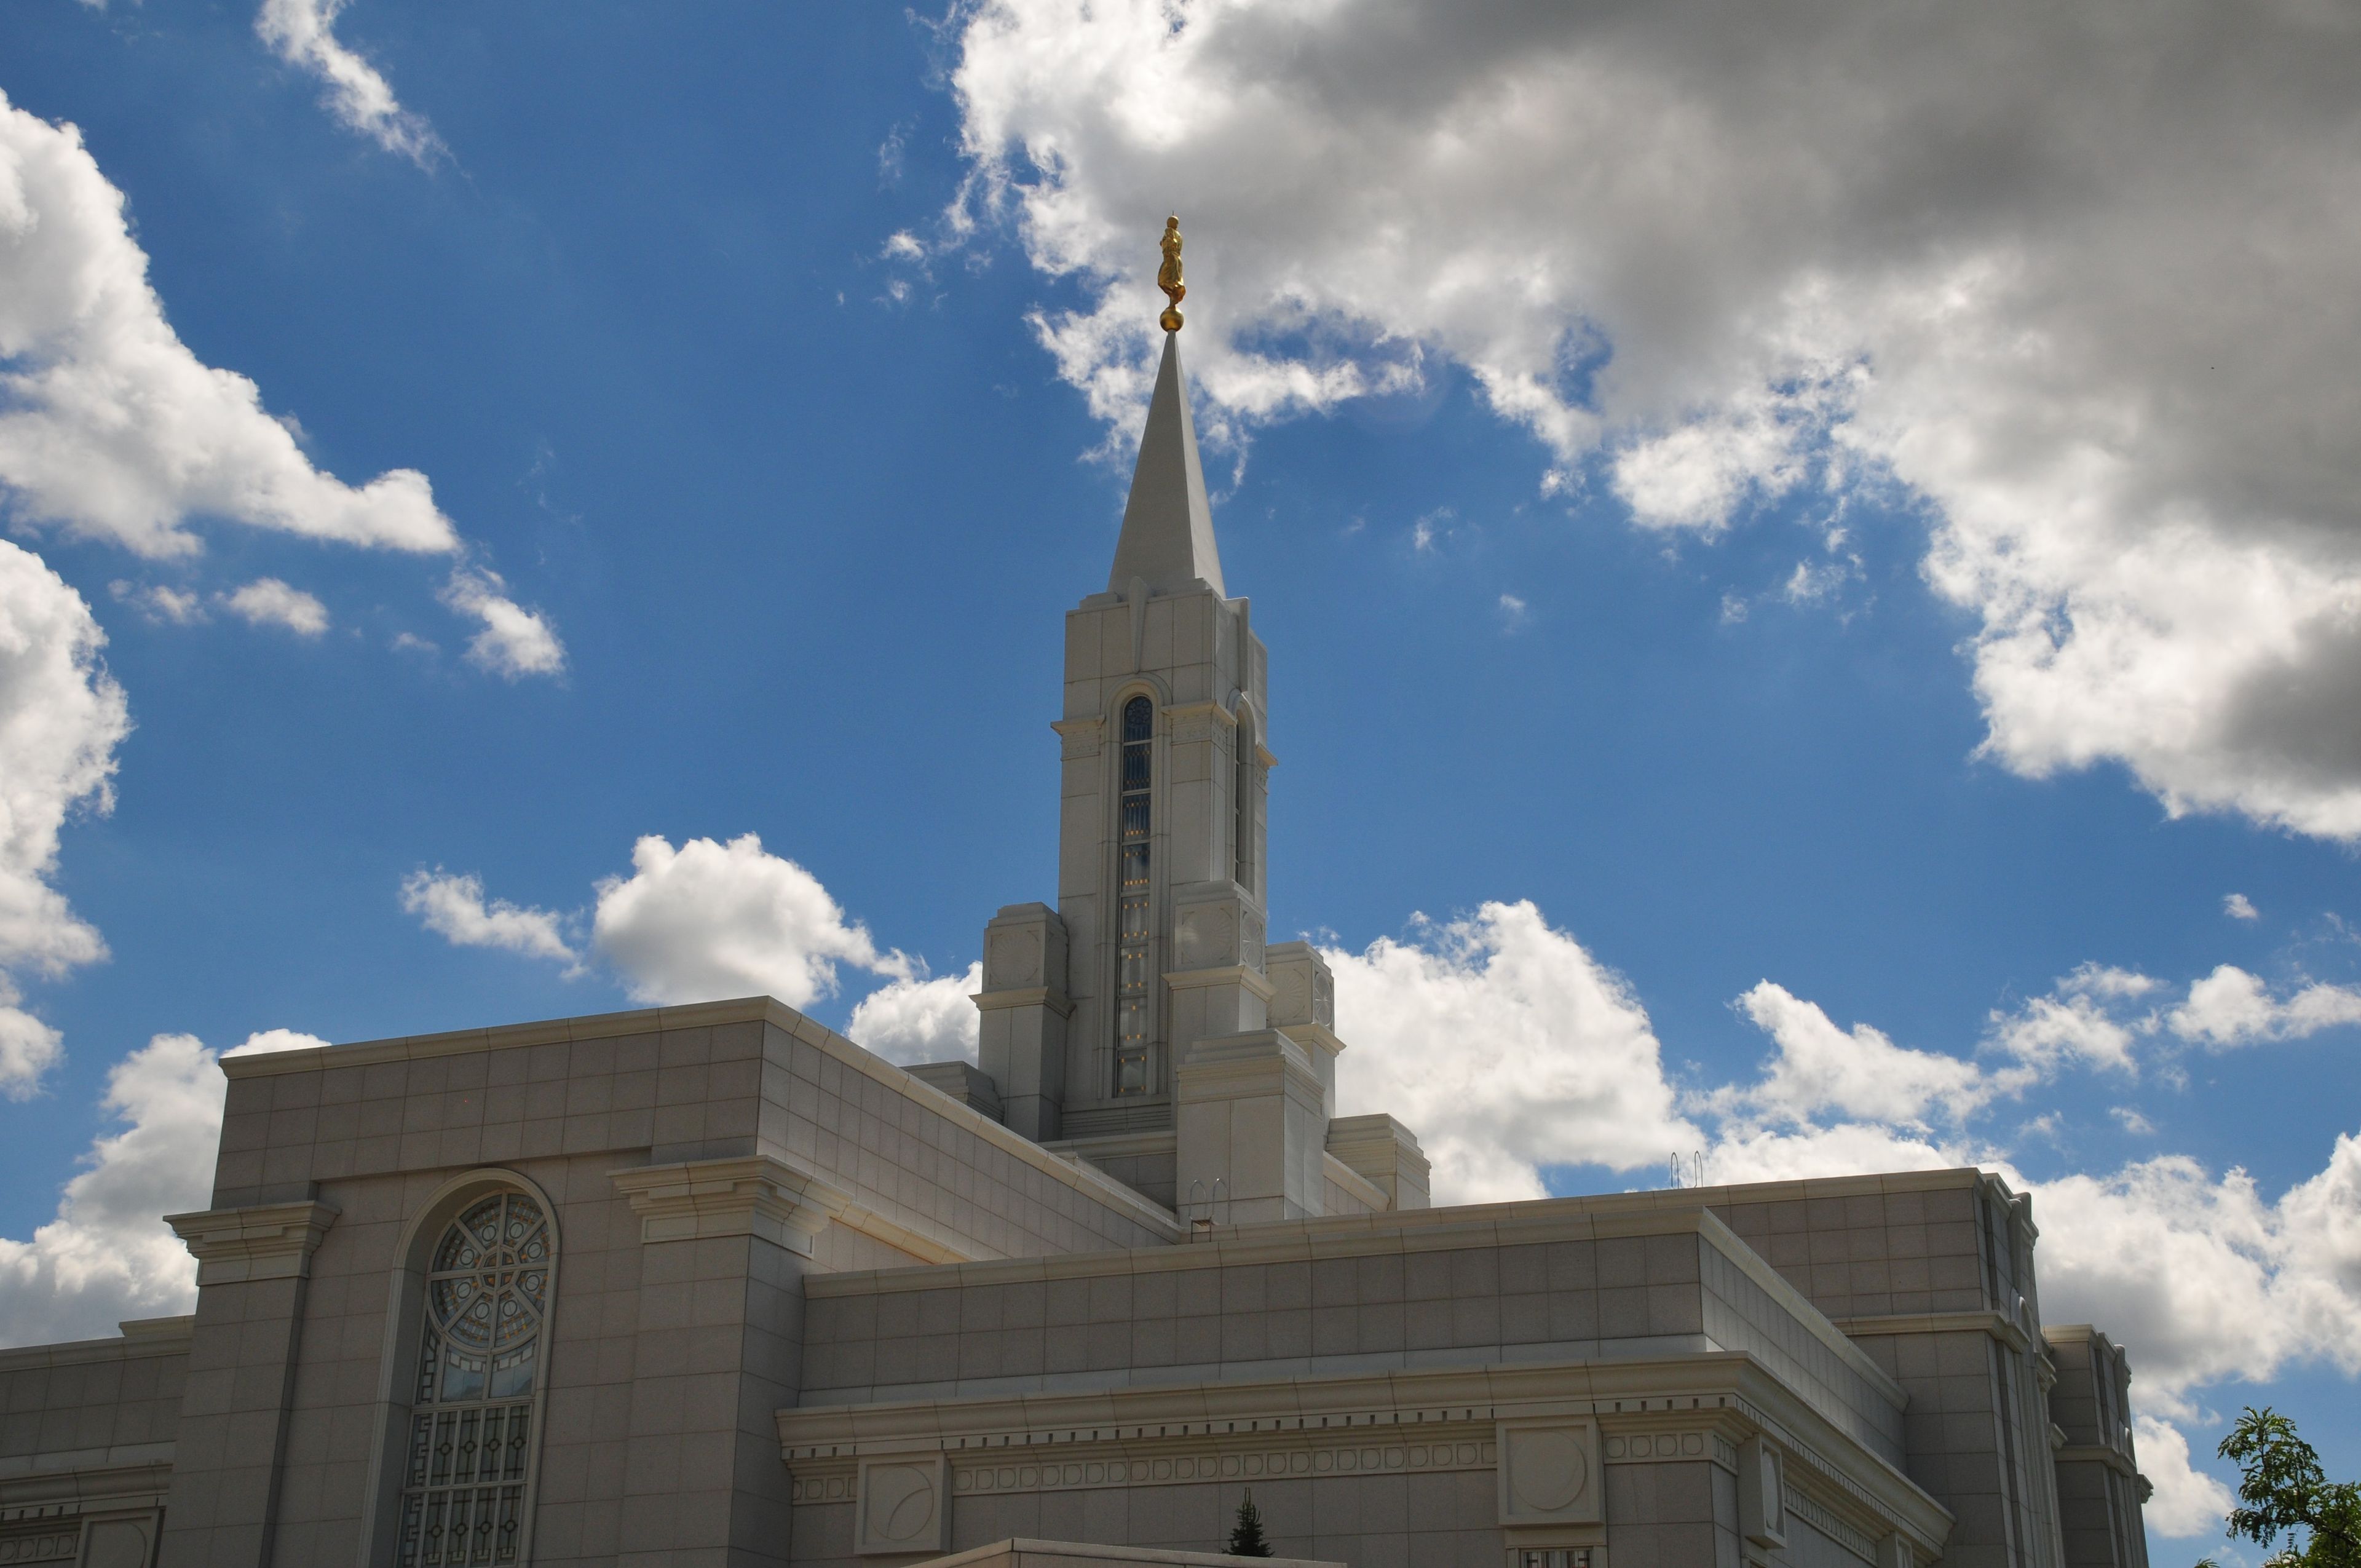 The spire of the Bountiful Utah Temple.